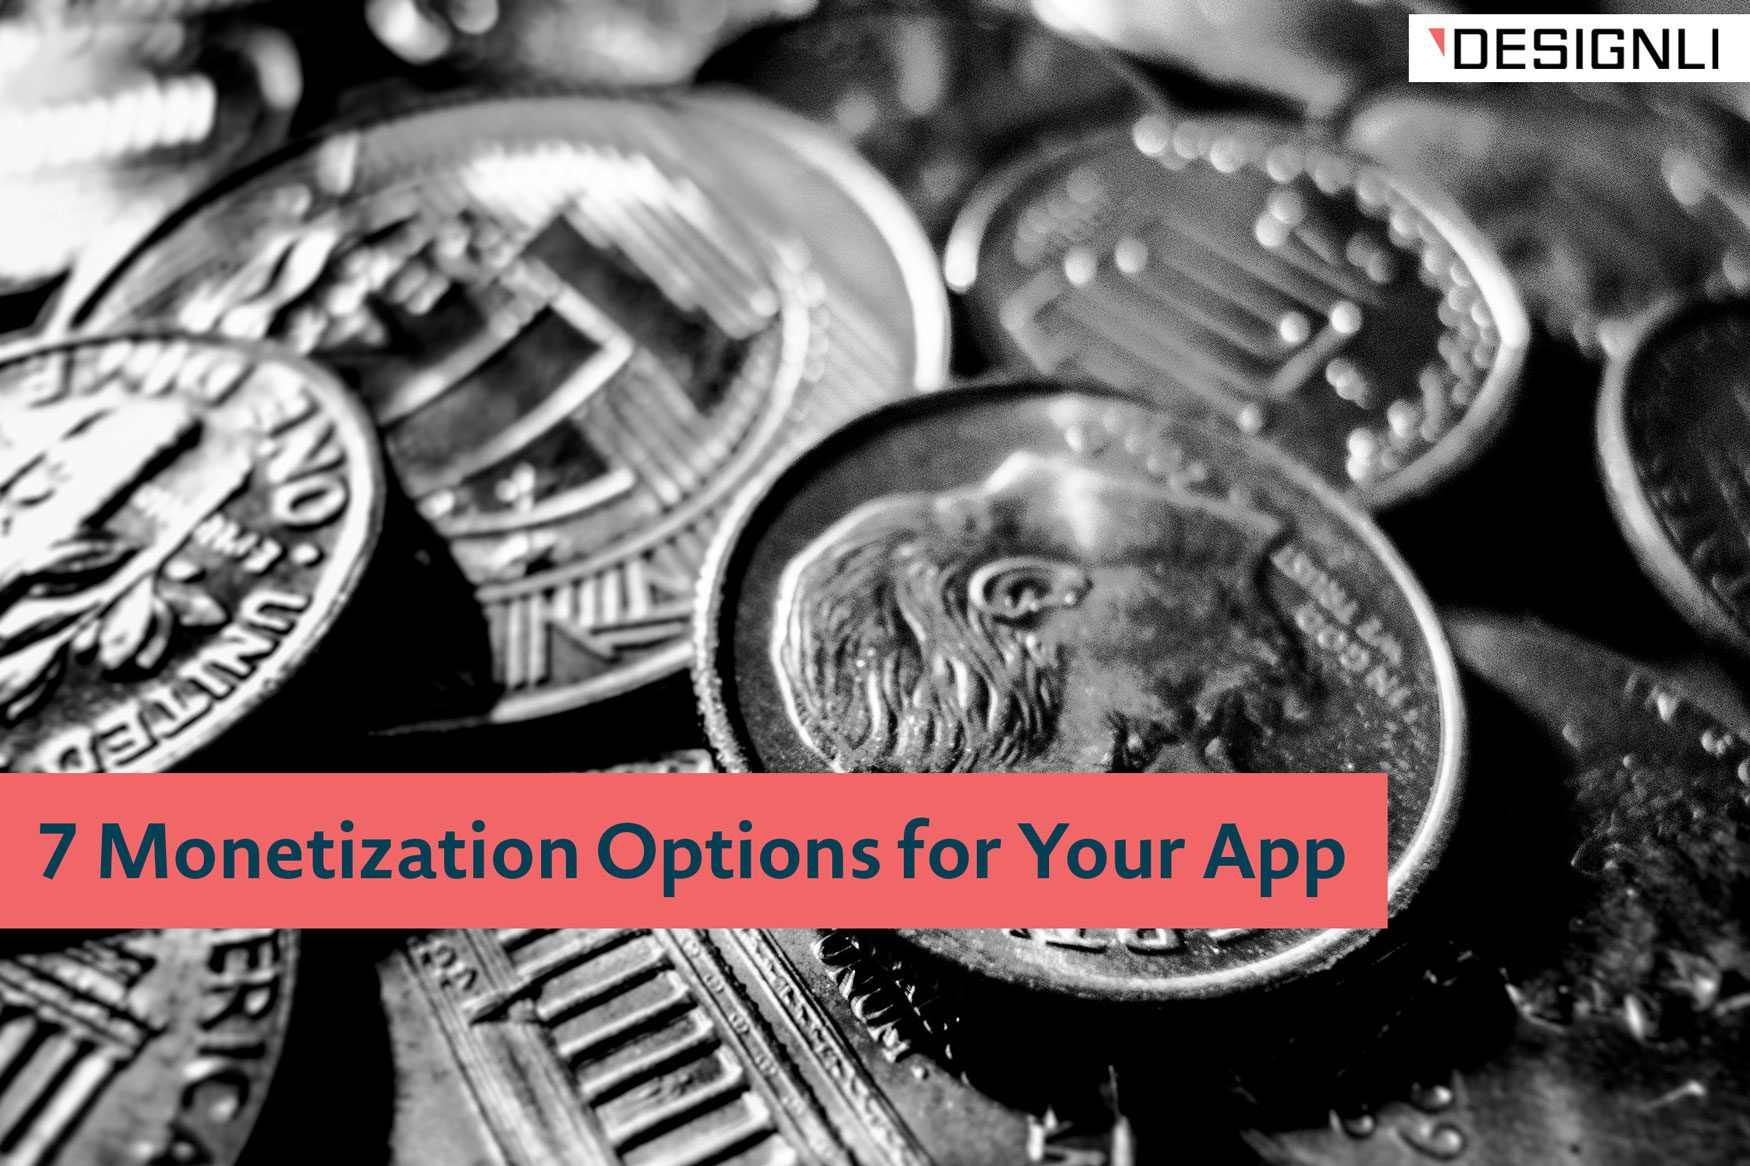 7 Monetization Options for Your App